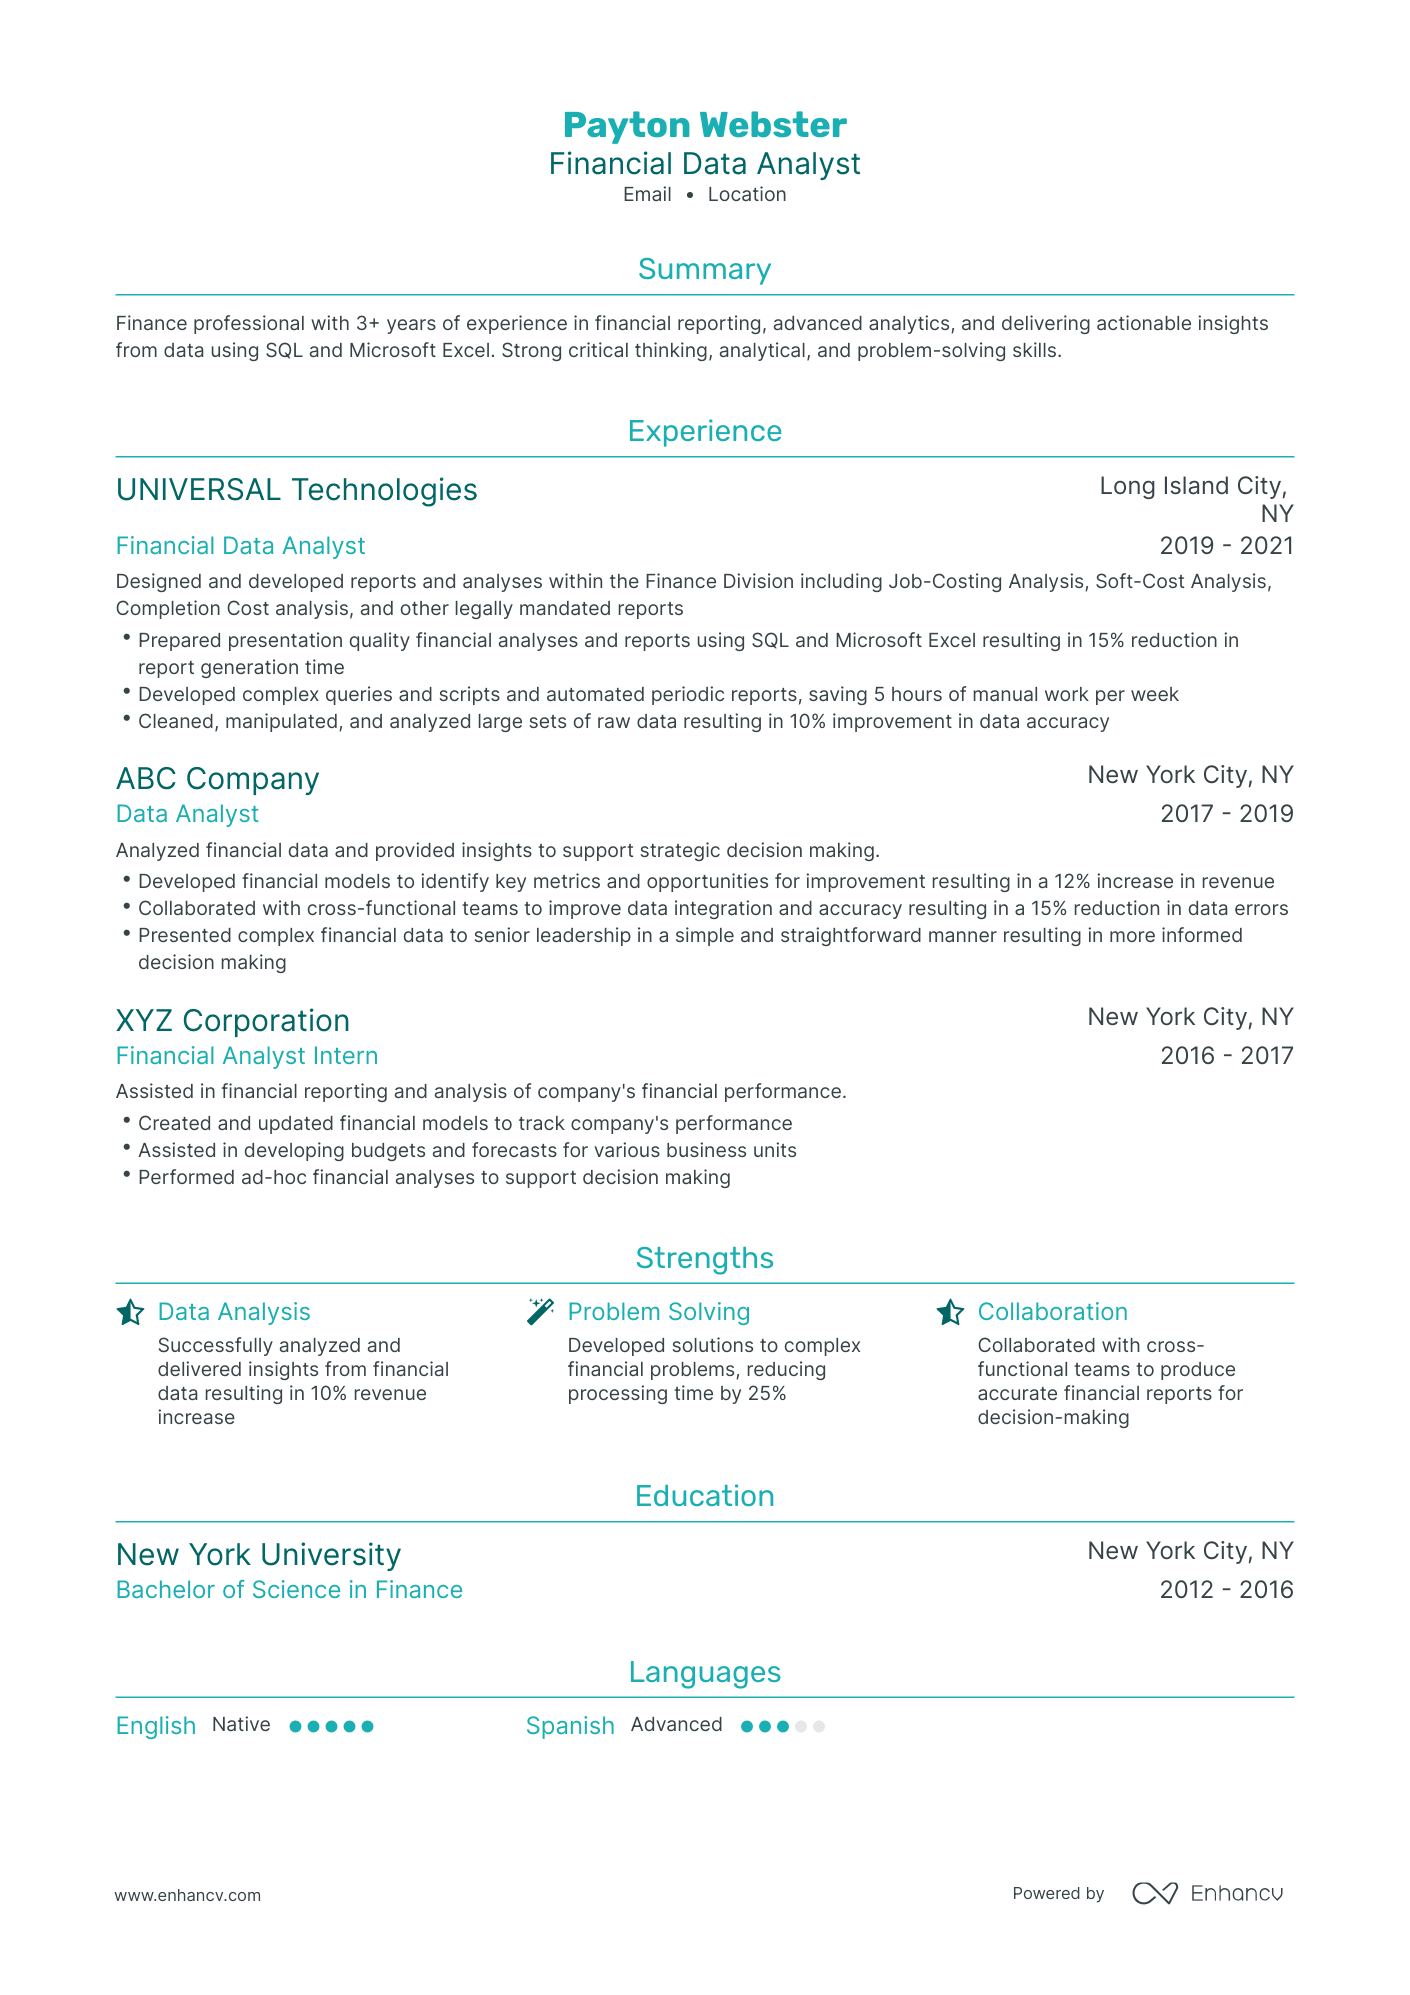 Traditional Financial Data Analyst Resume Template